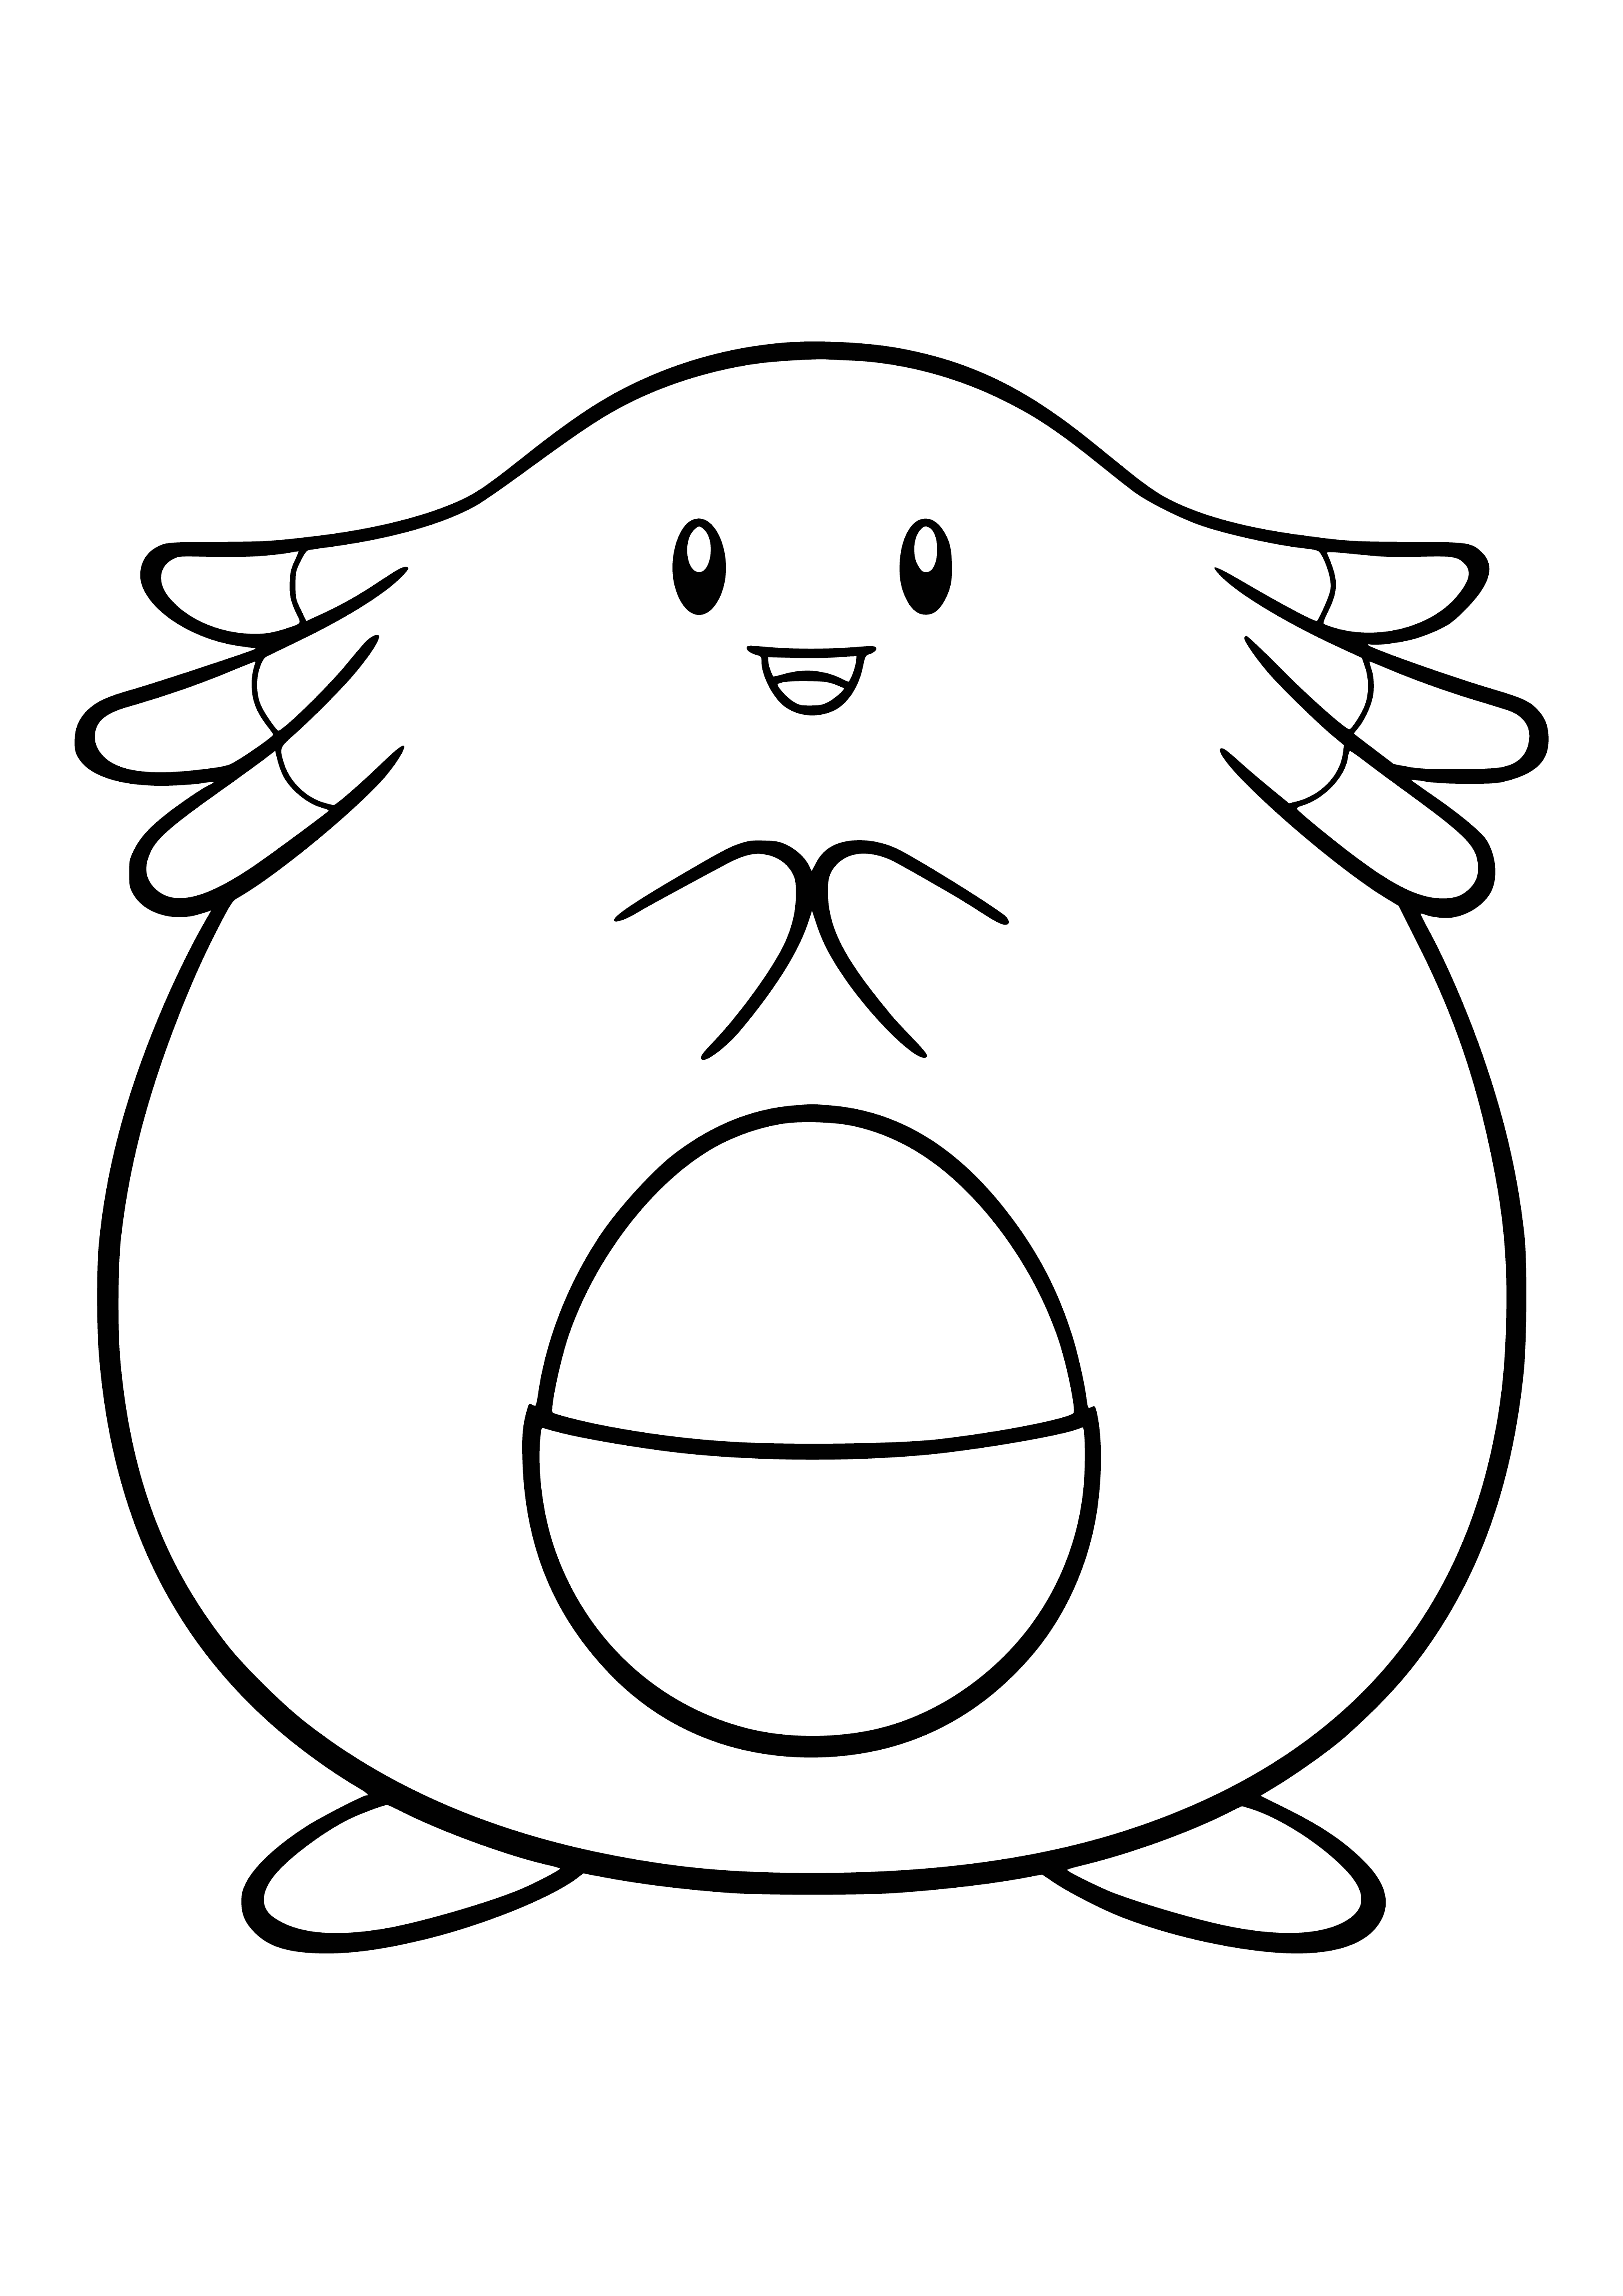 coloring page: A chubby pink Pokémon with a stubby beak and white tail. Has a round body and large egg-shaped stone on its belly. Short arms and legs.